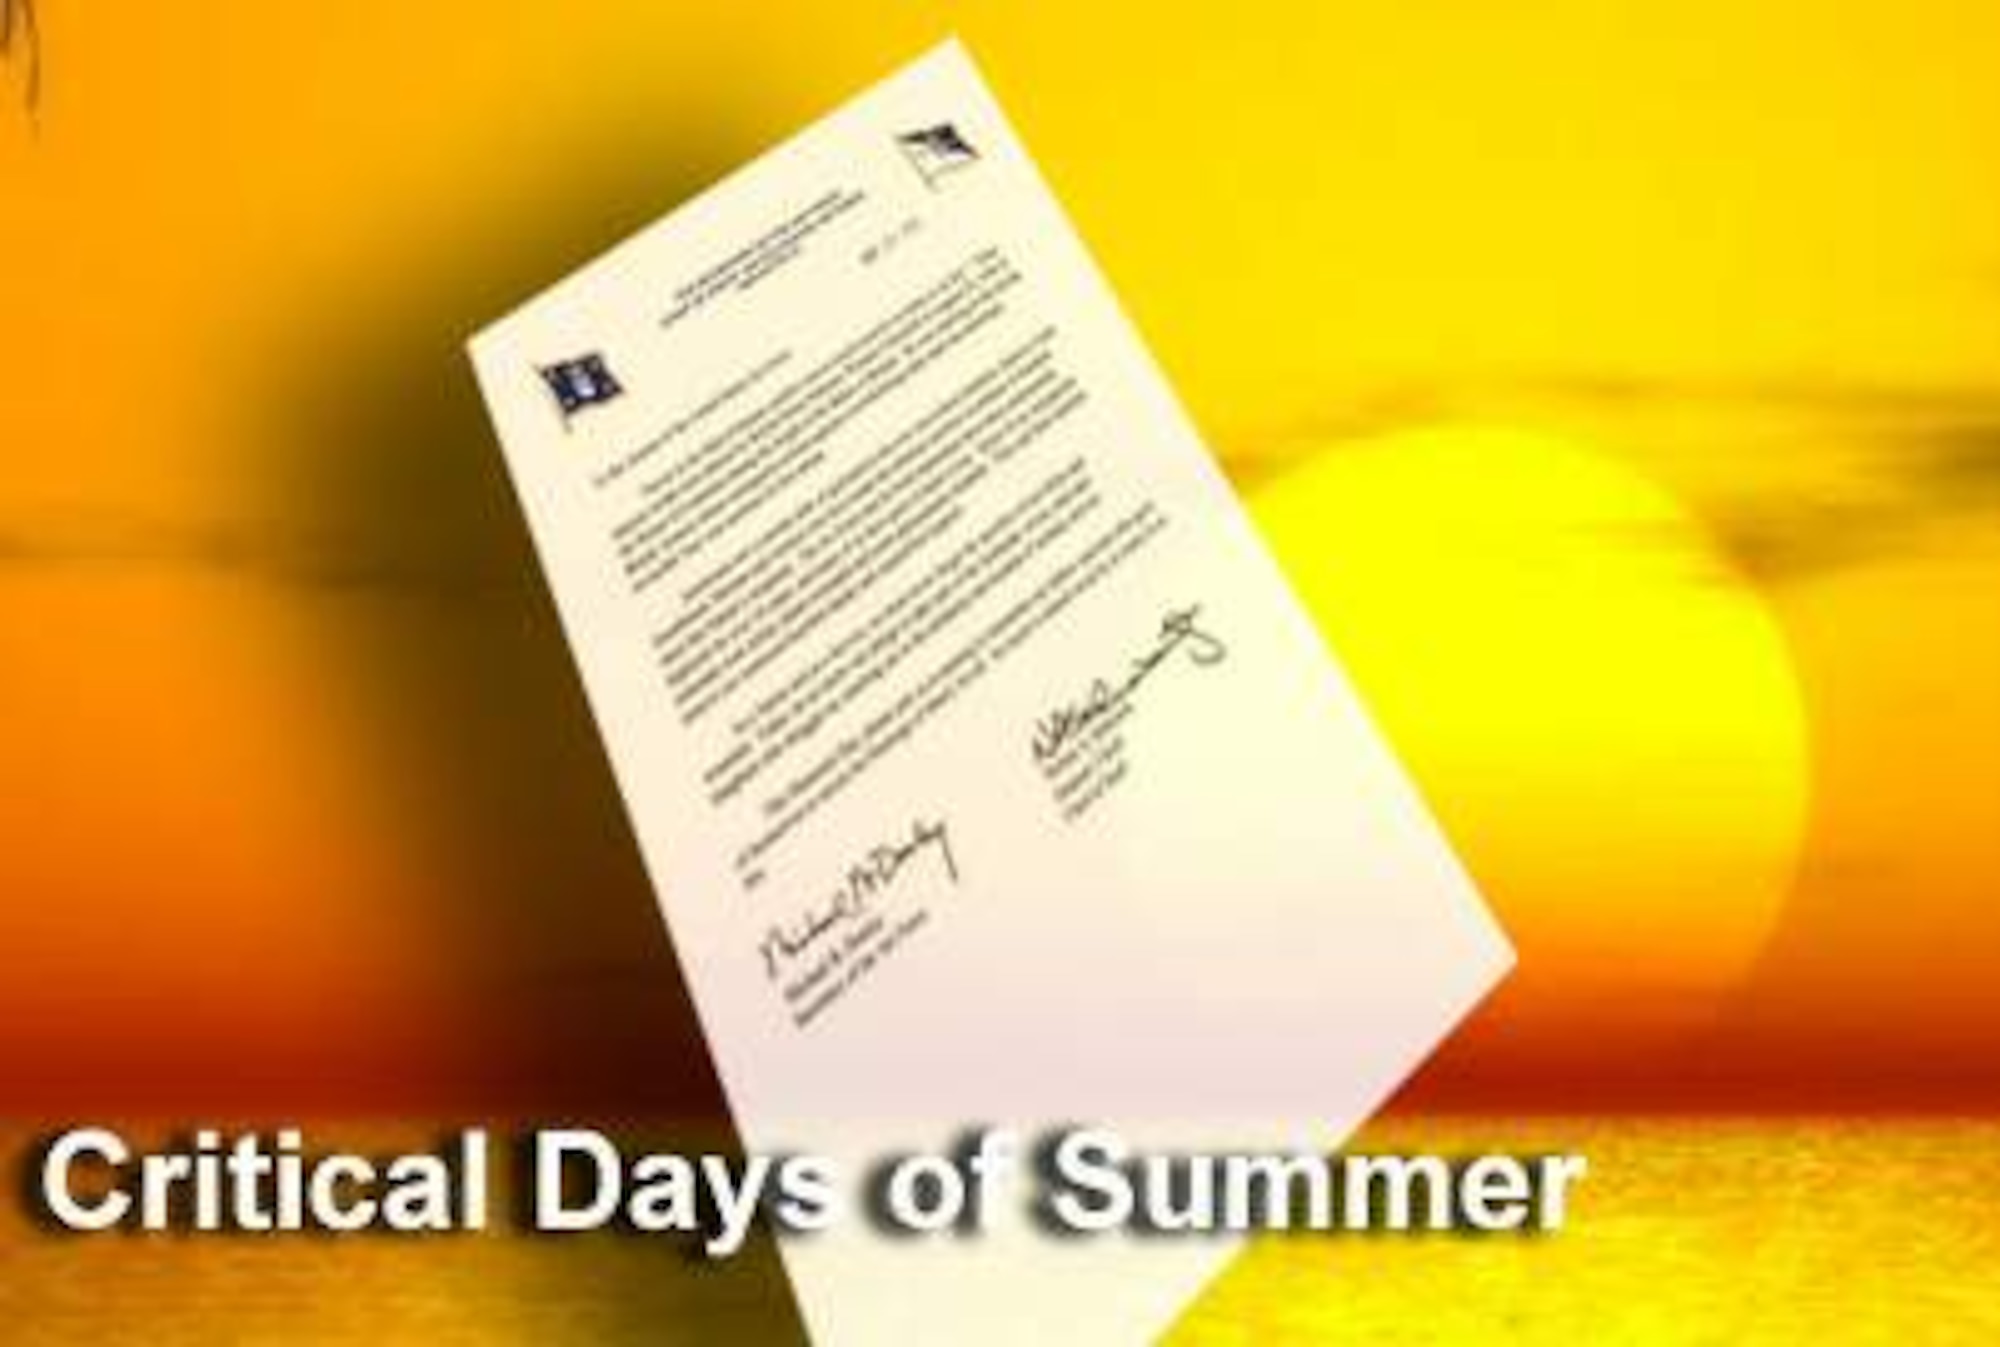 The secretary of the Air Force and the Air Force chief of staff cited the start of the 2009 Critical Days of Summer campaign, and called for everyone to be proactive in saving lives during this high-risk season in a letter to Airmen sent out May 22. 